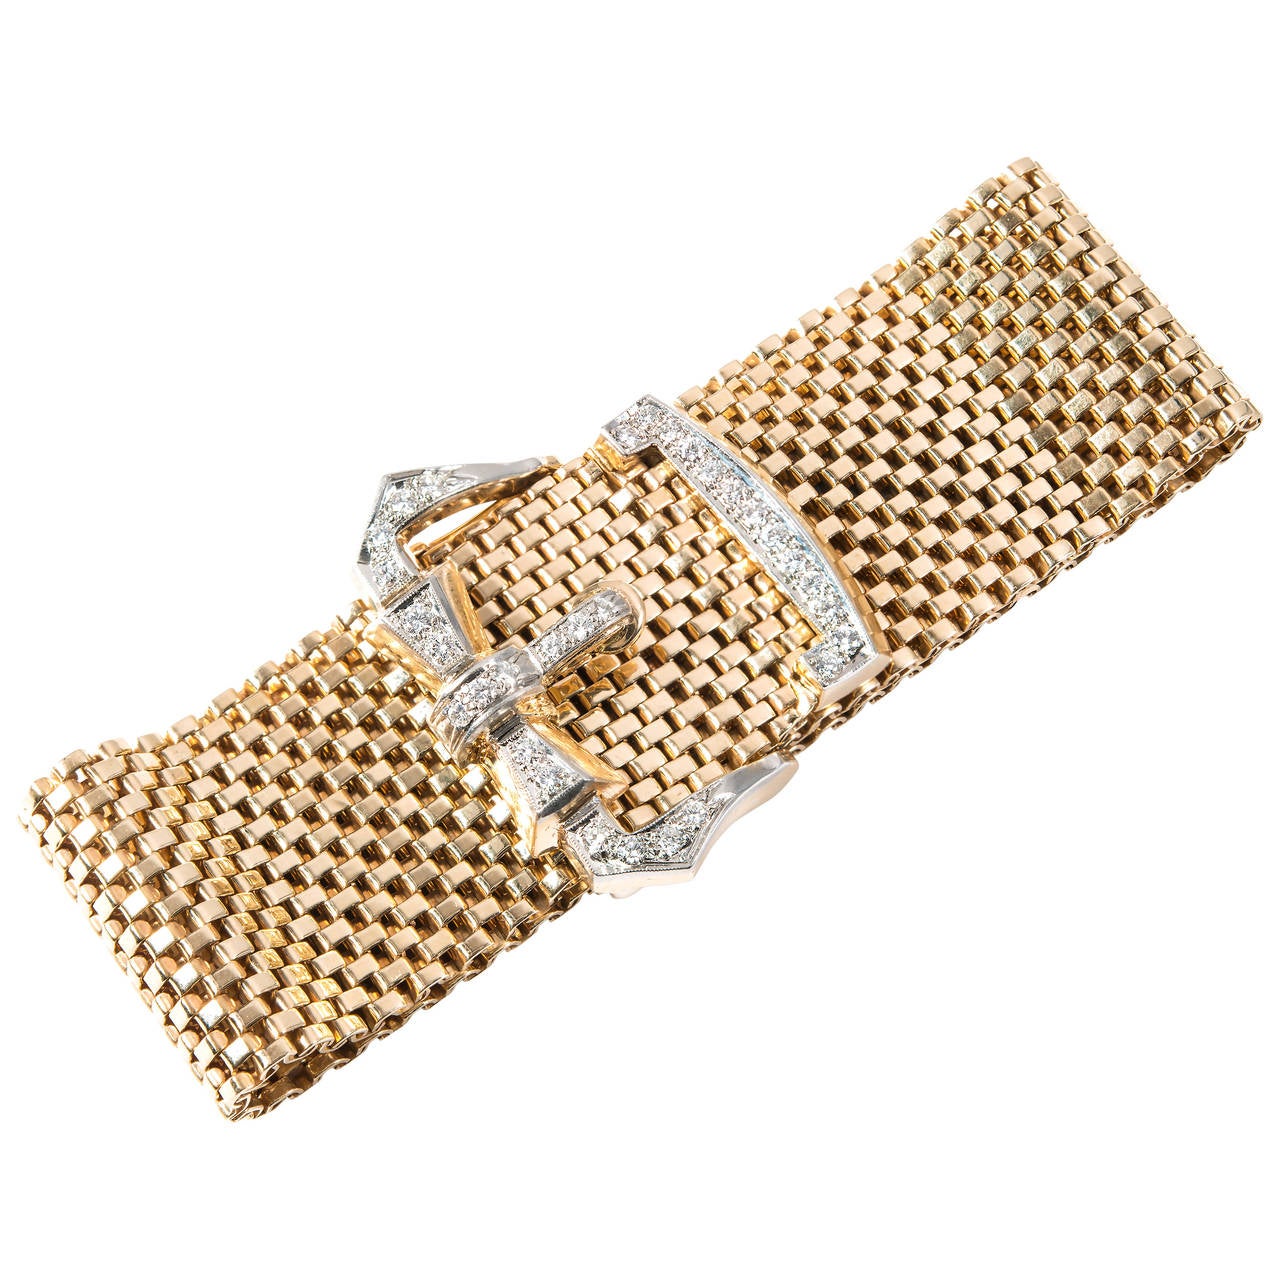 1940's Wide mesh diamond 14k yellow and white gold bracelet with hinged buckle and white gold diamond catch. 

31 round full cut diamonds, approx. total weight .80cts, G – H, VS
14k yellow gold
Tested: 14k
Stamped: Not
75.3 grams
Width at top: